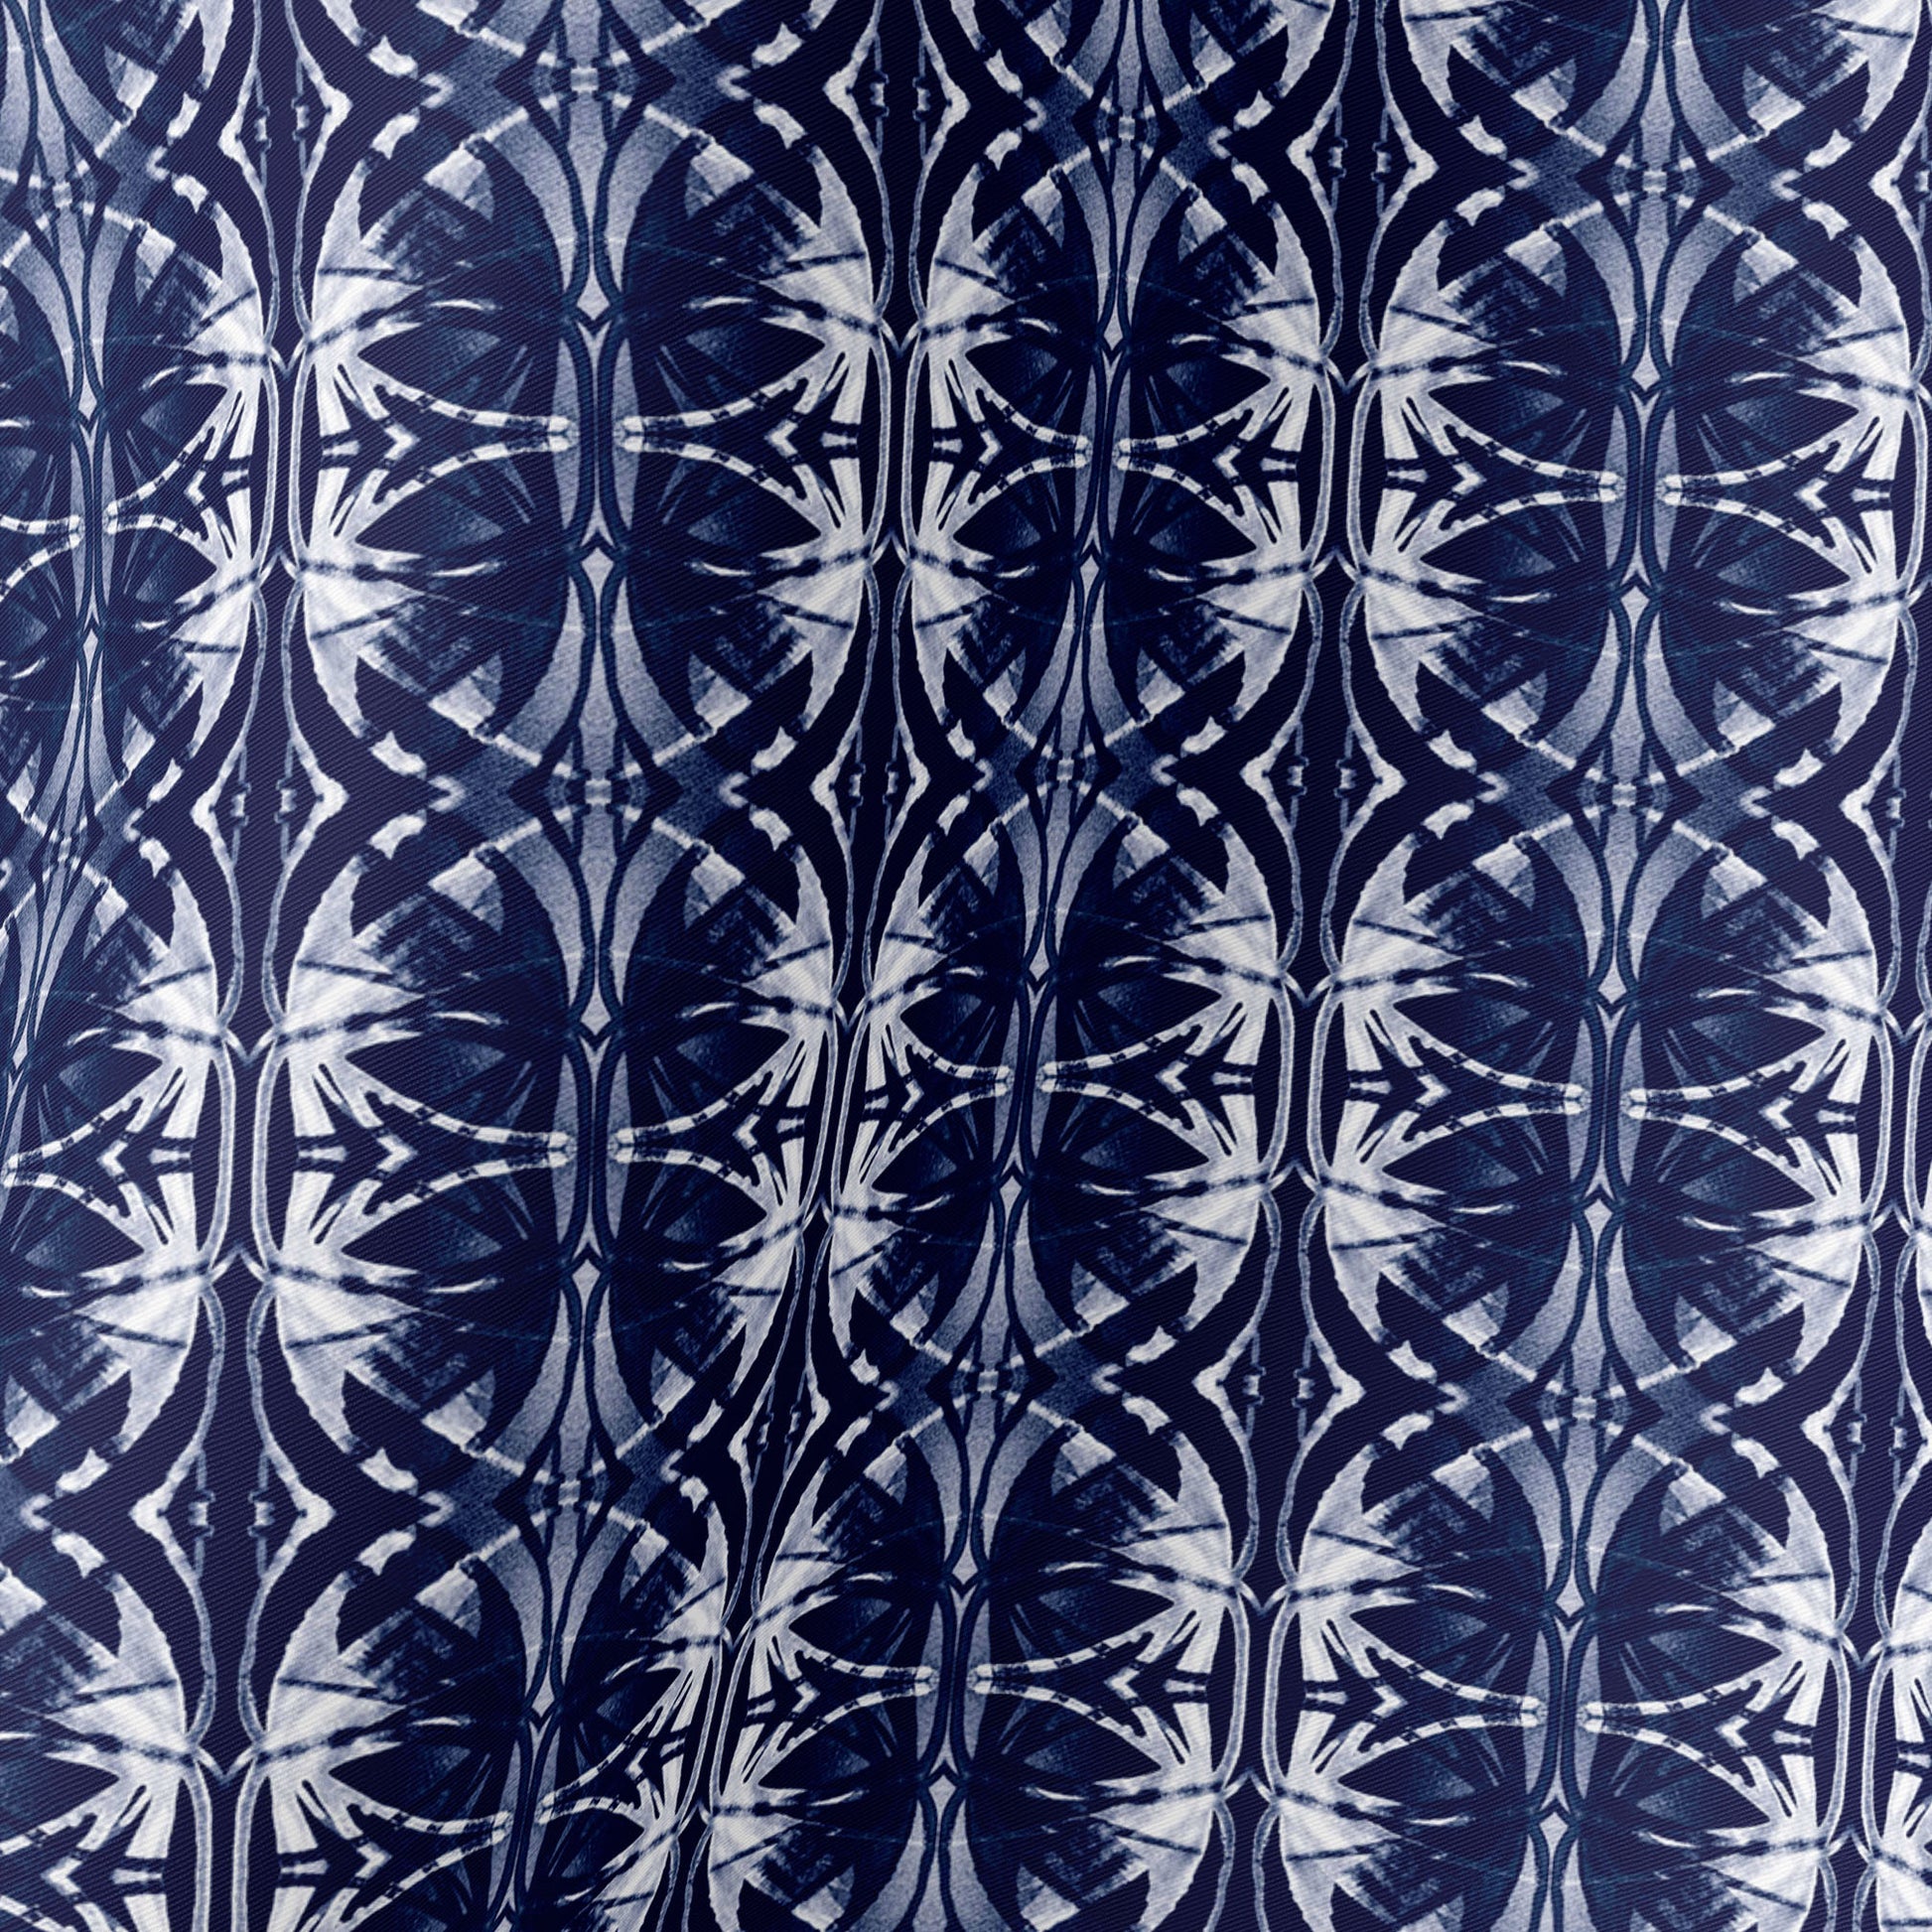 Detail of silk scarf featuring a navy blue and white hand-painted pattern.